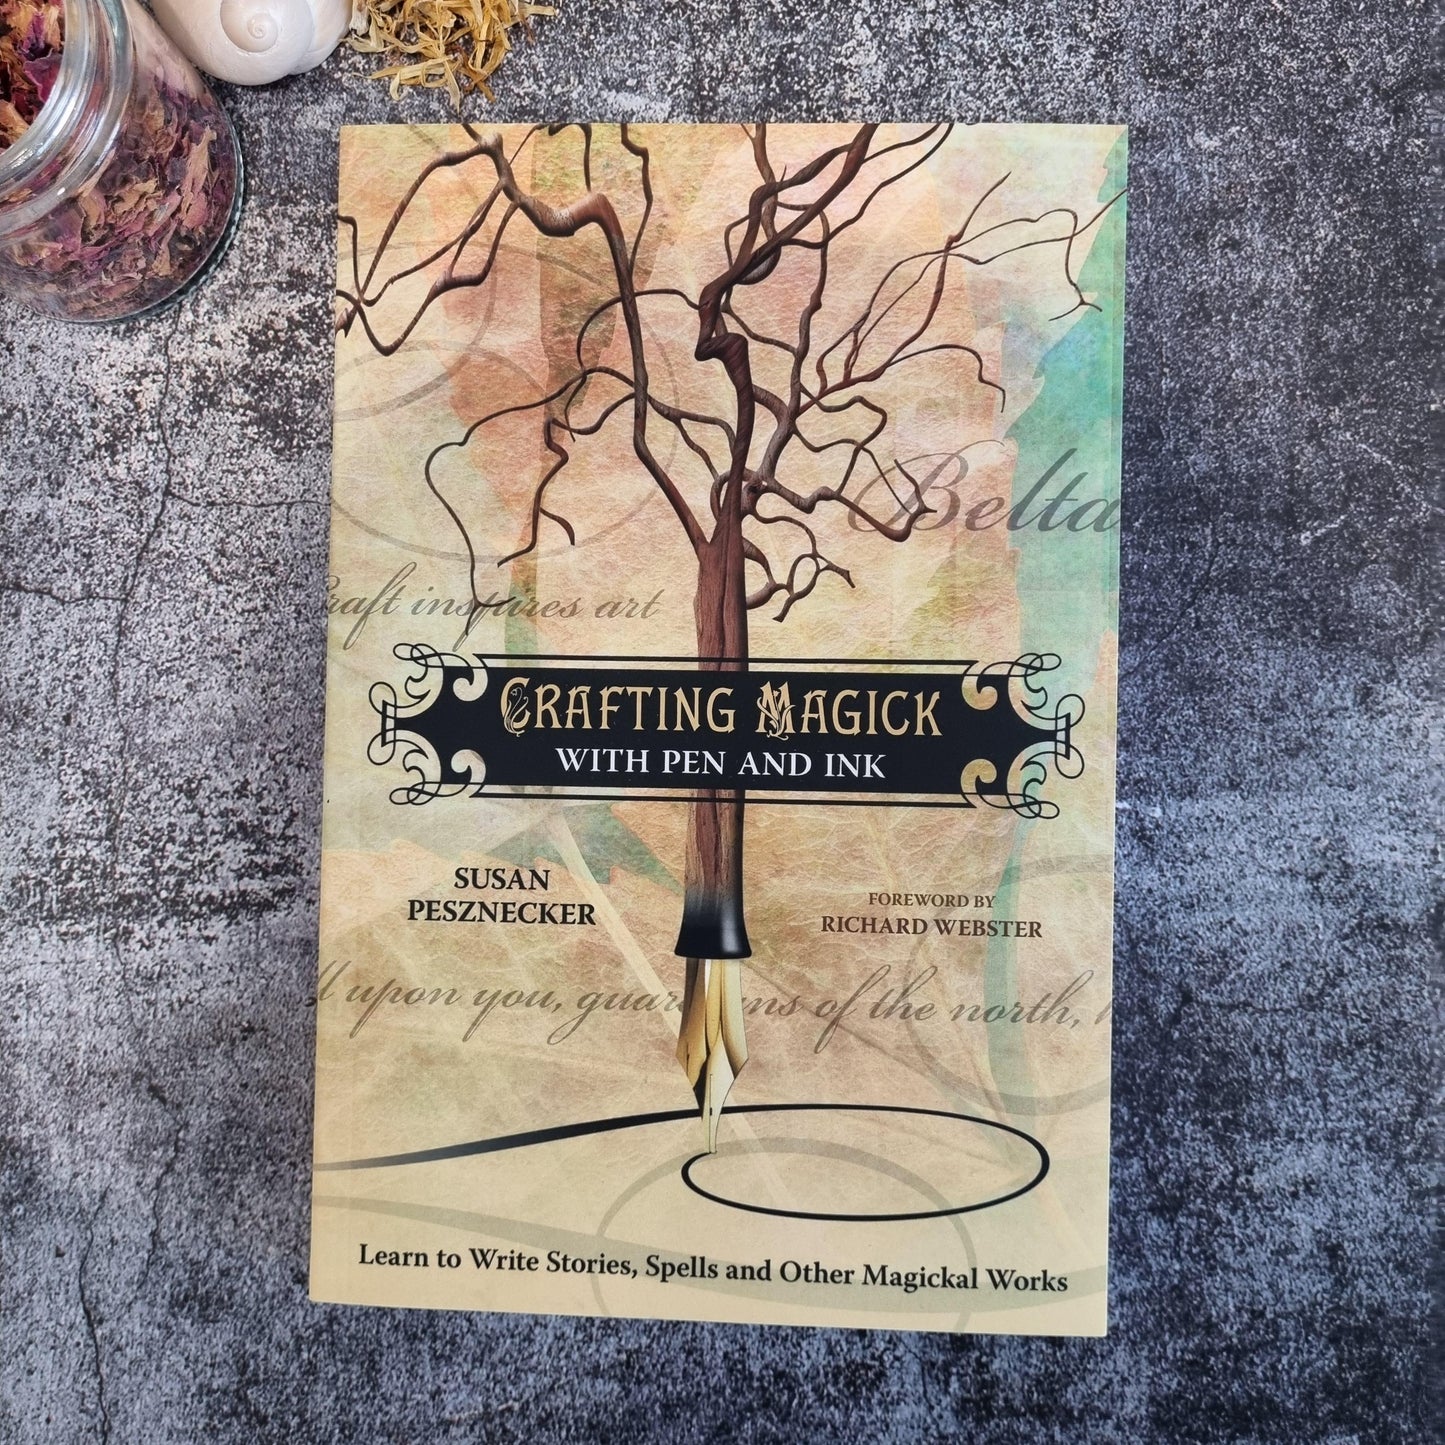 Crafting Magick with Pen & Ink